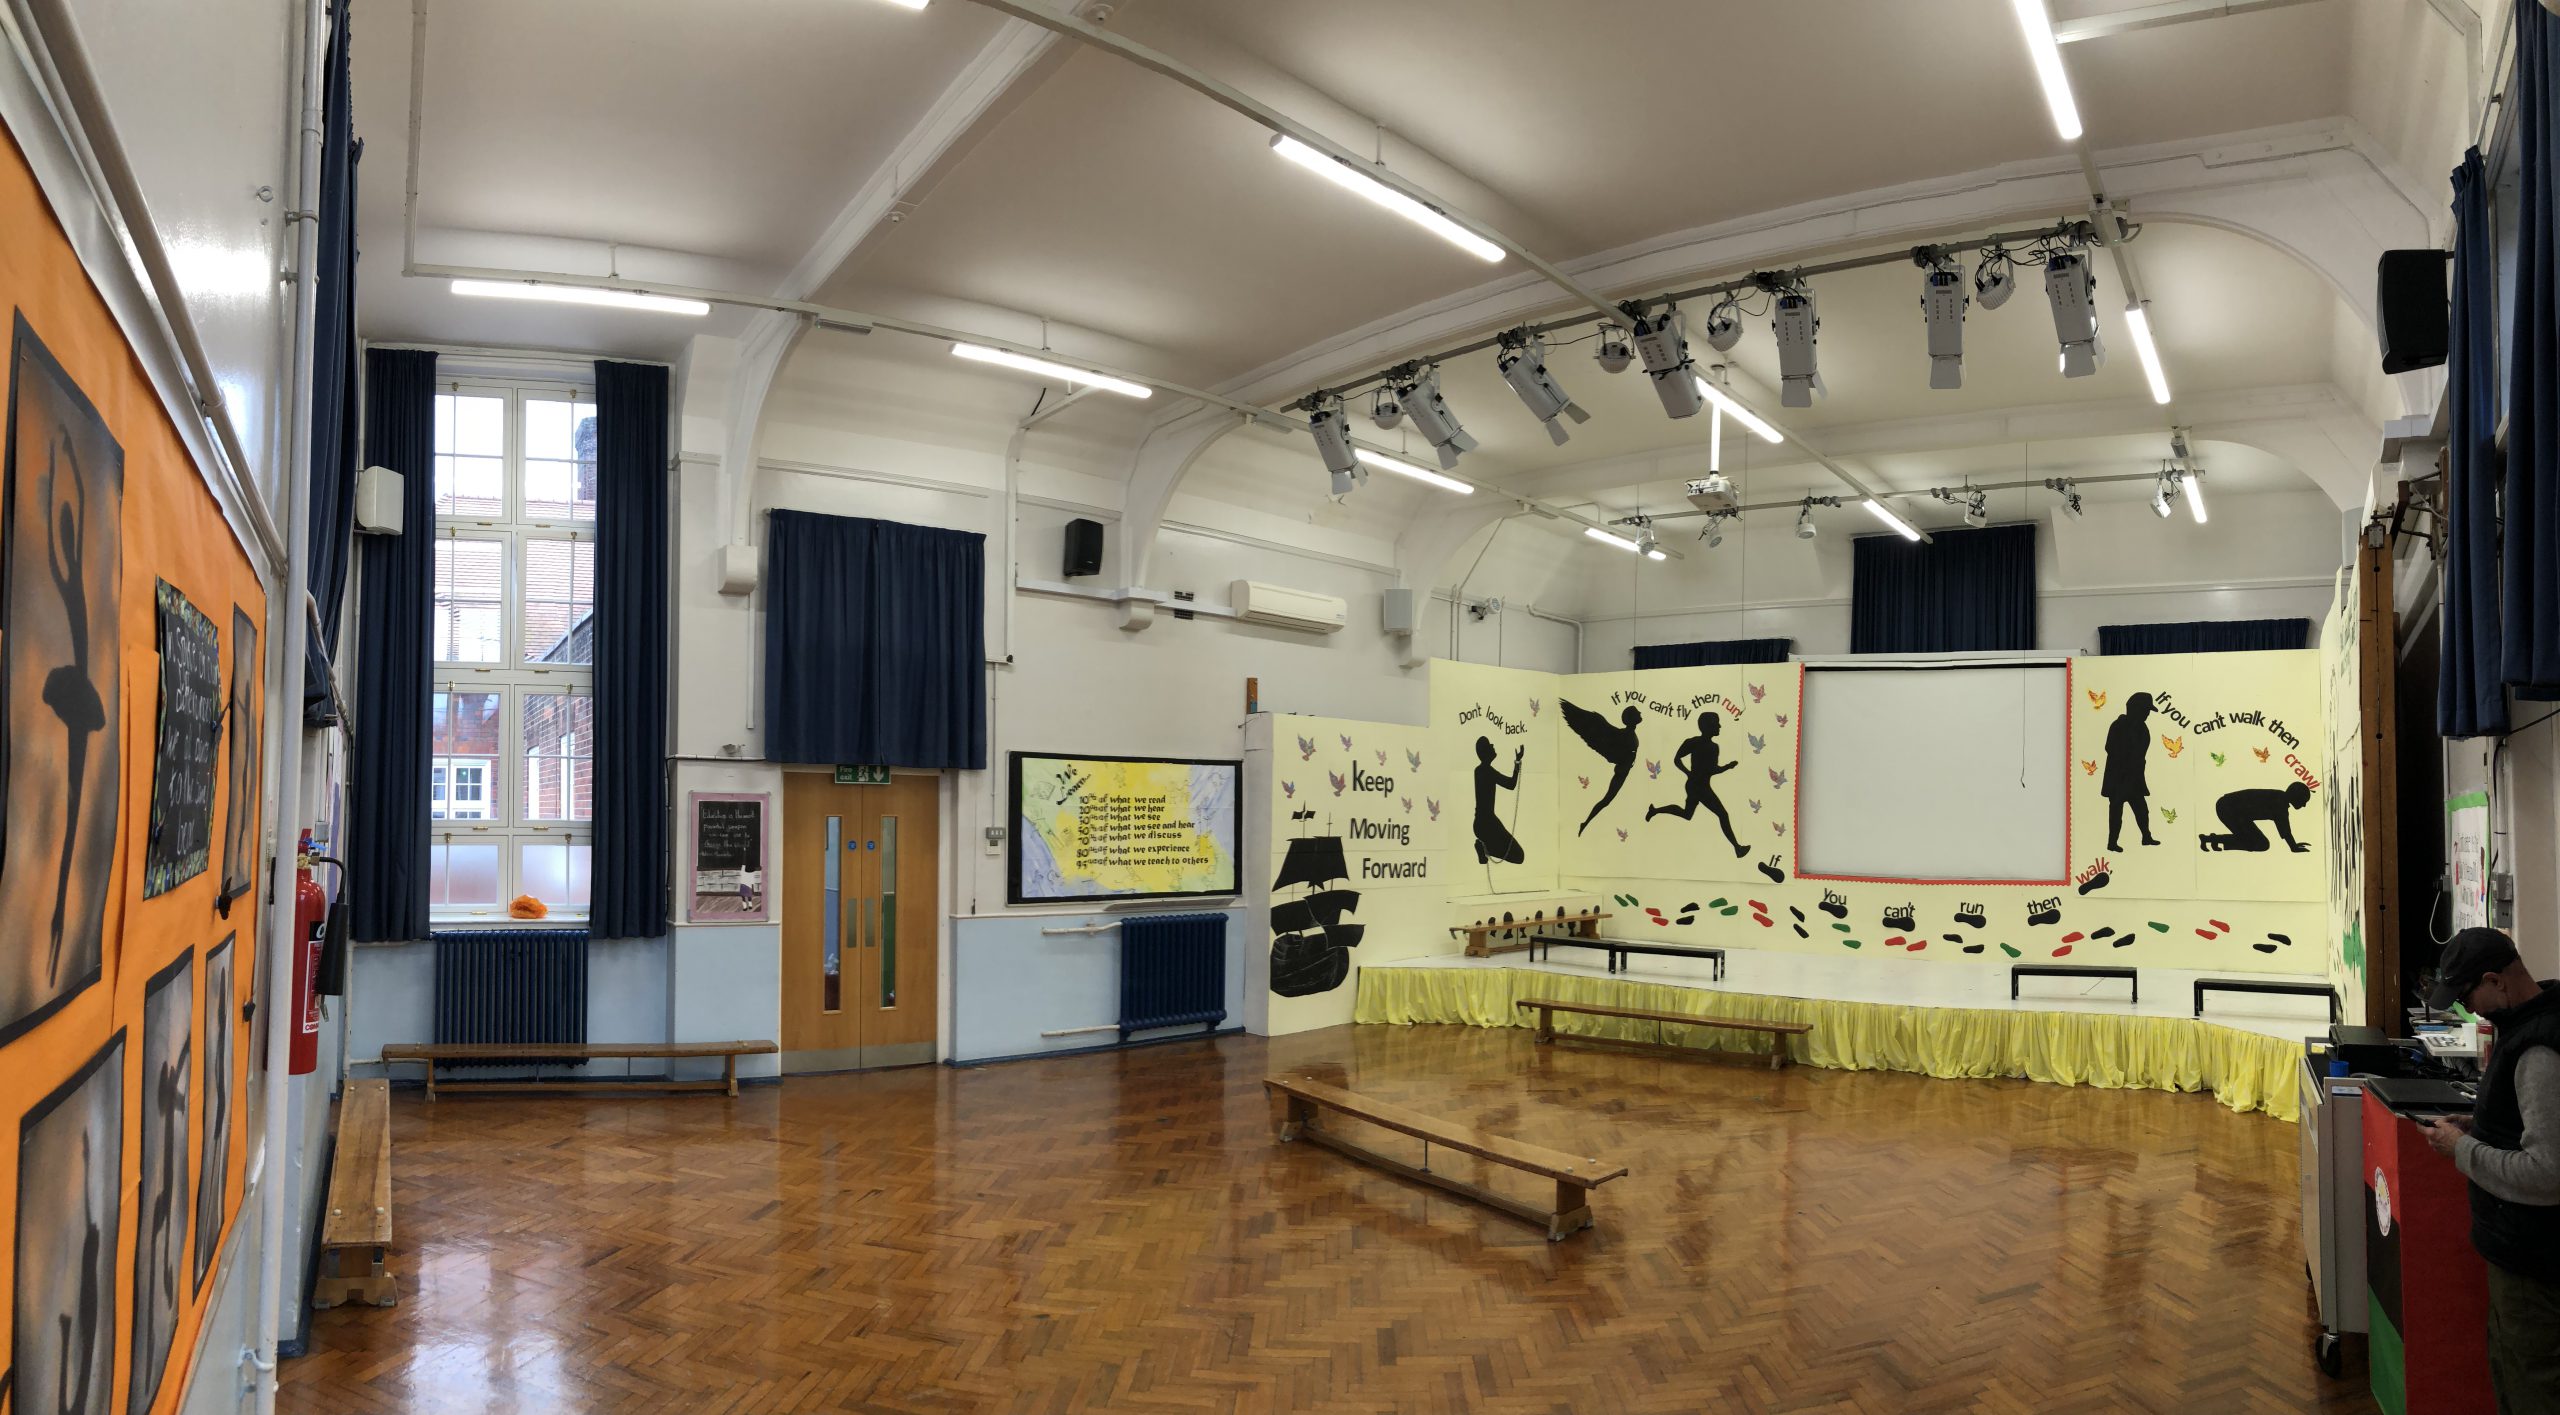 Miles Coverdale Primary School is on track to reduce its annual running costs following successful implementation of an upgrade to LED lighting financed by Salix SEELS funding.